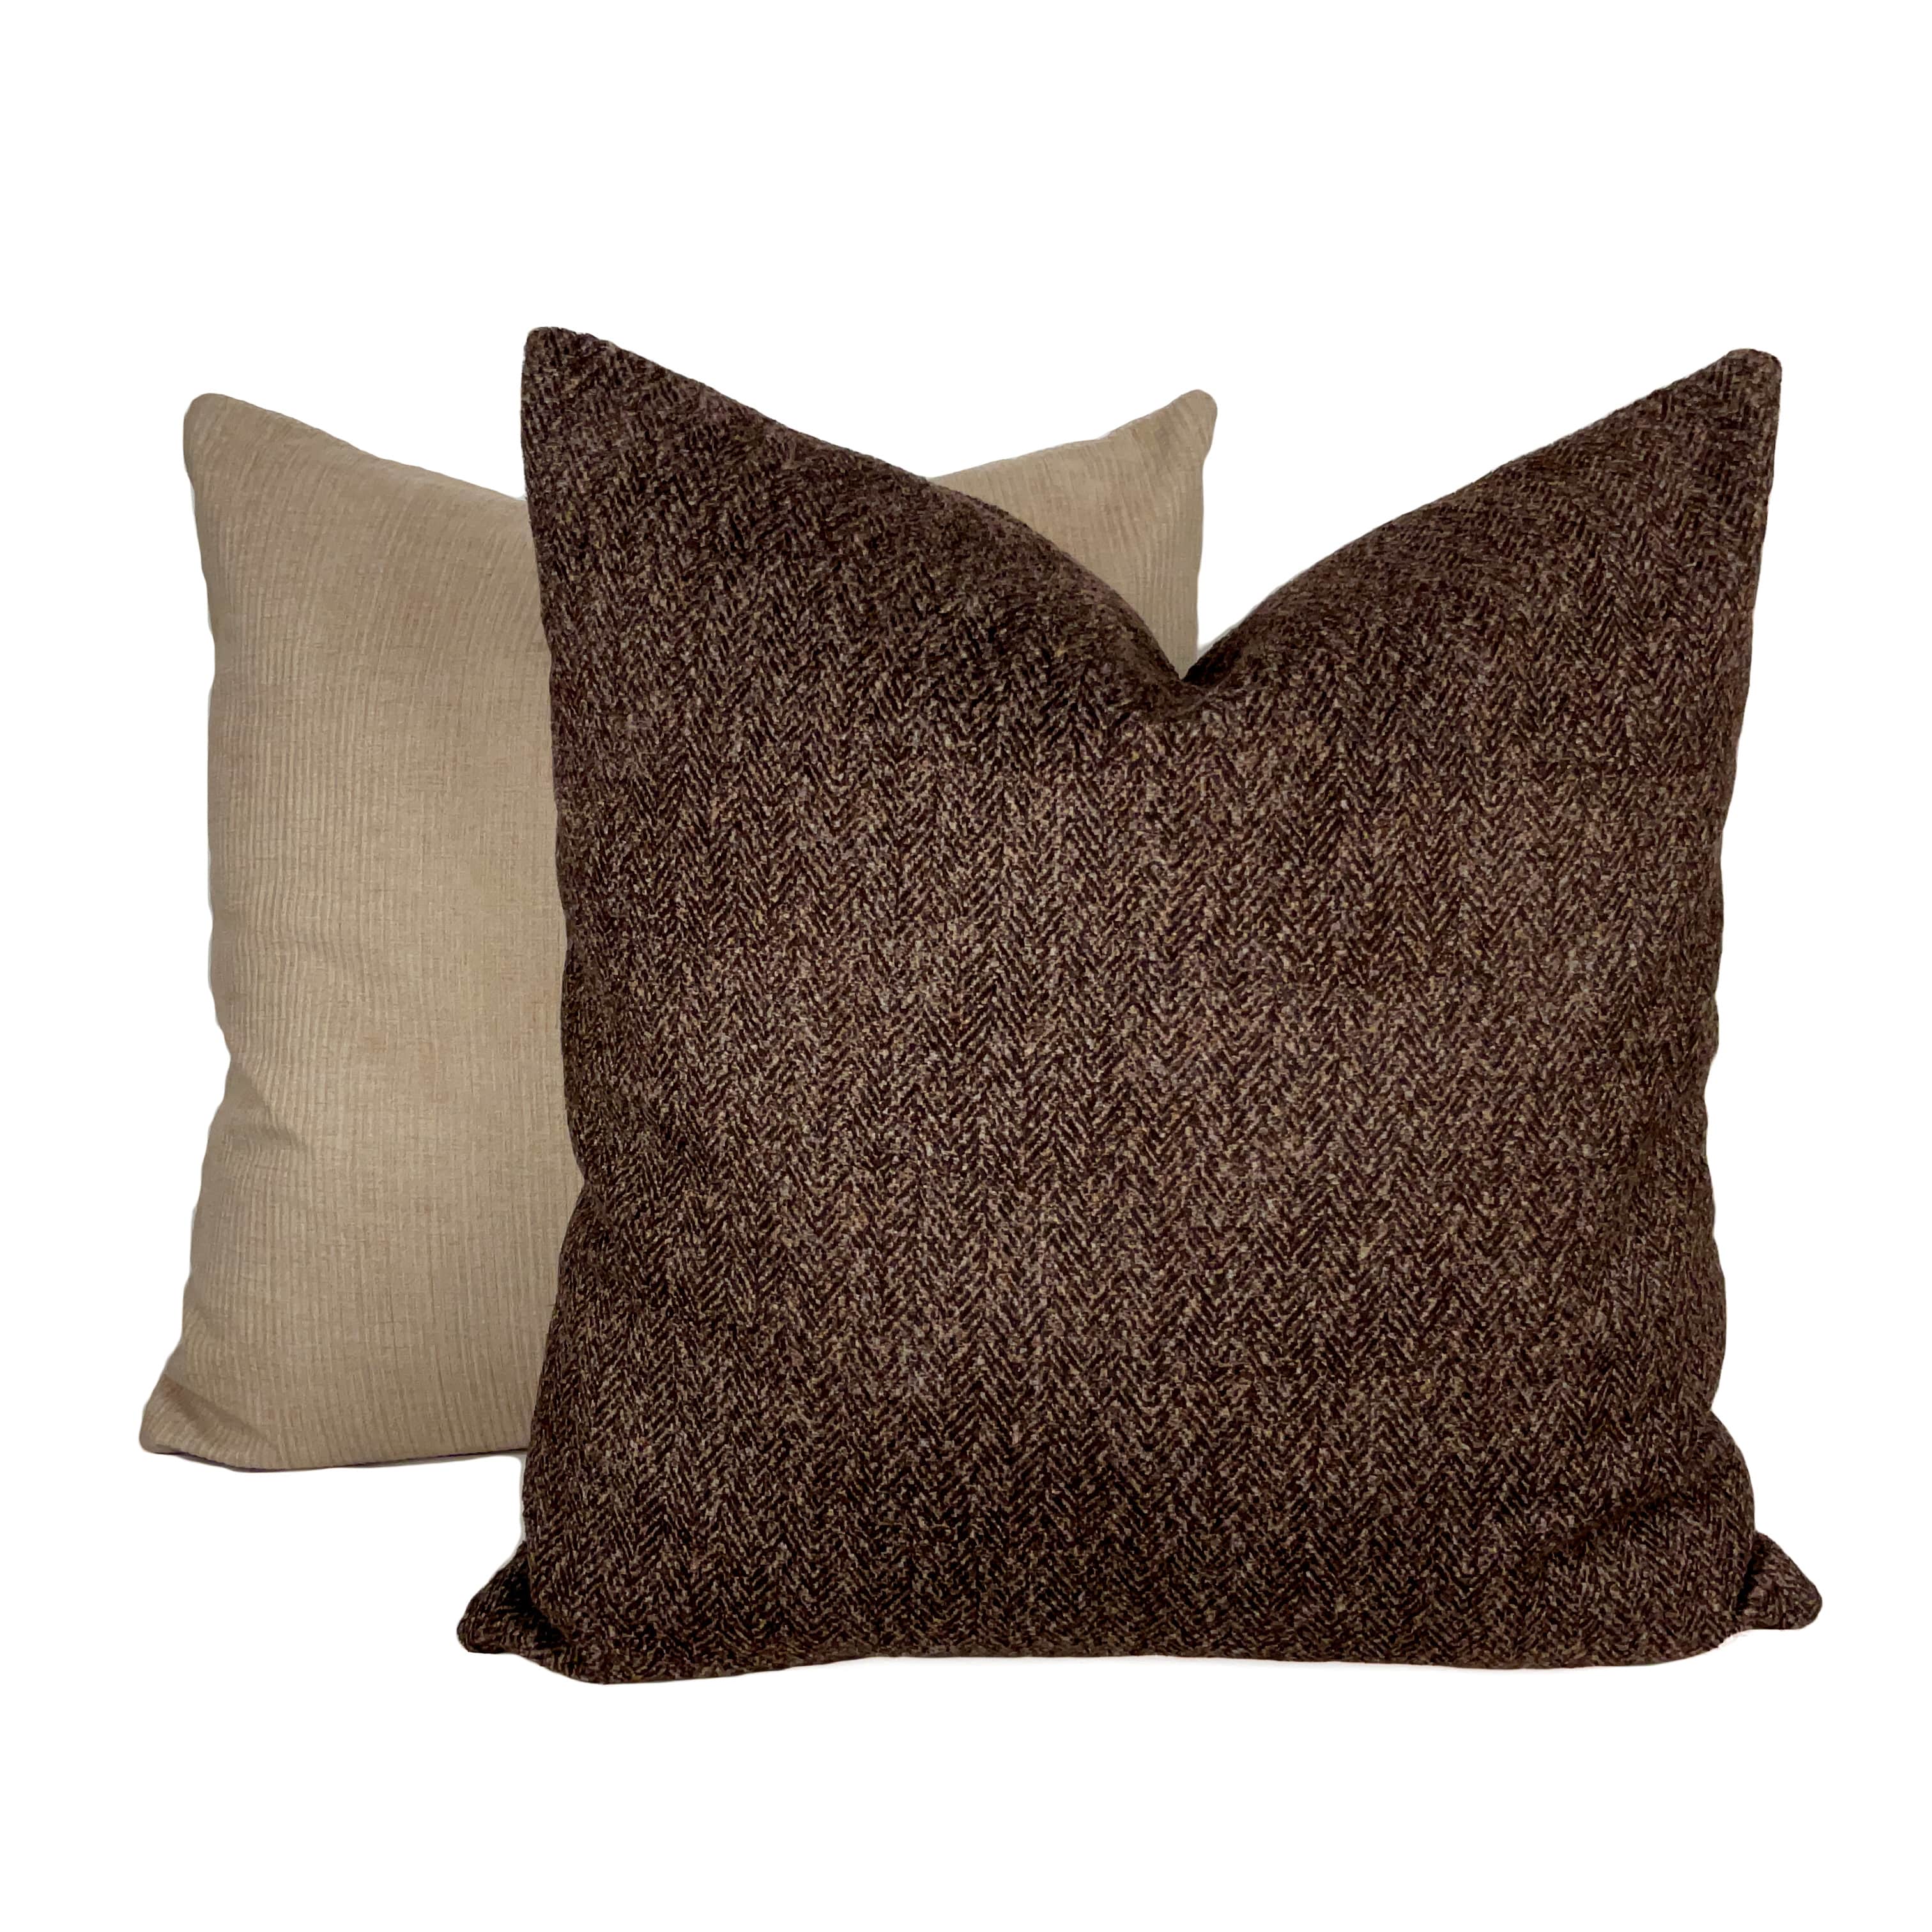 Plain Brown suede cushion placed against a white background